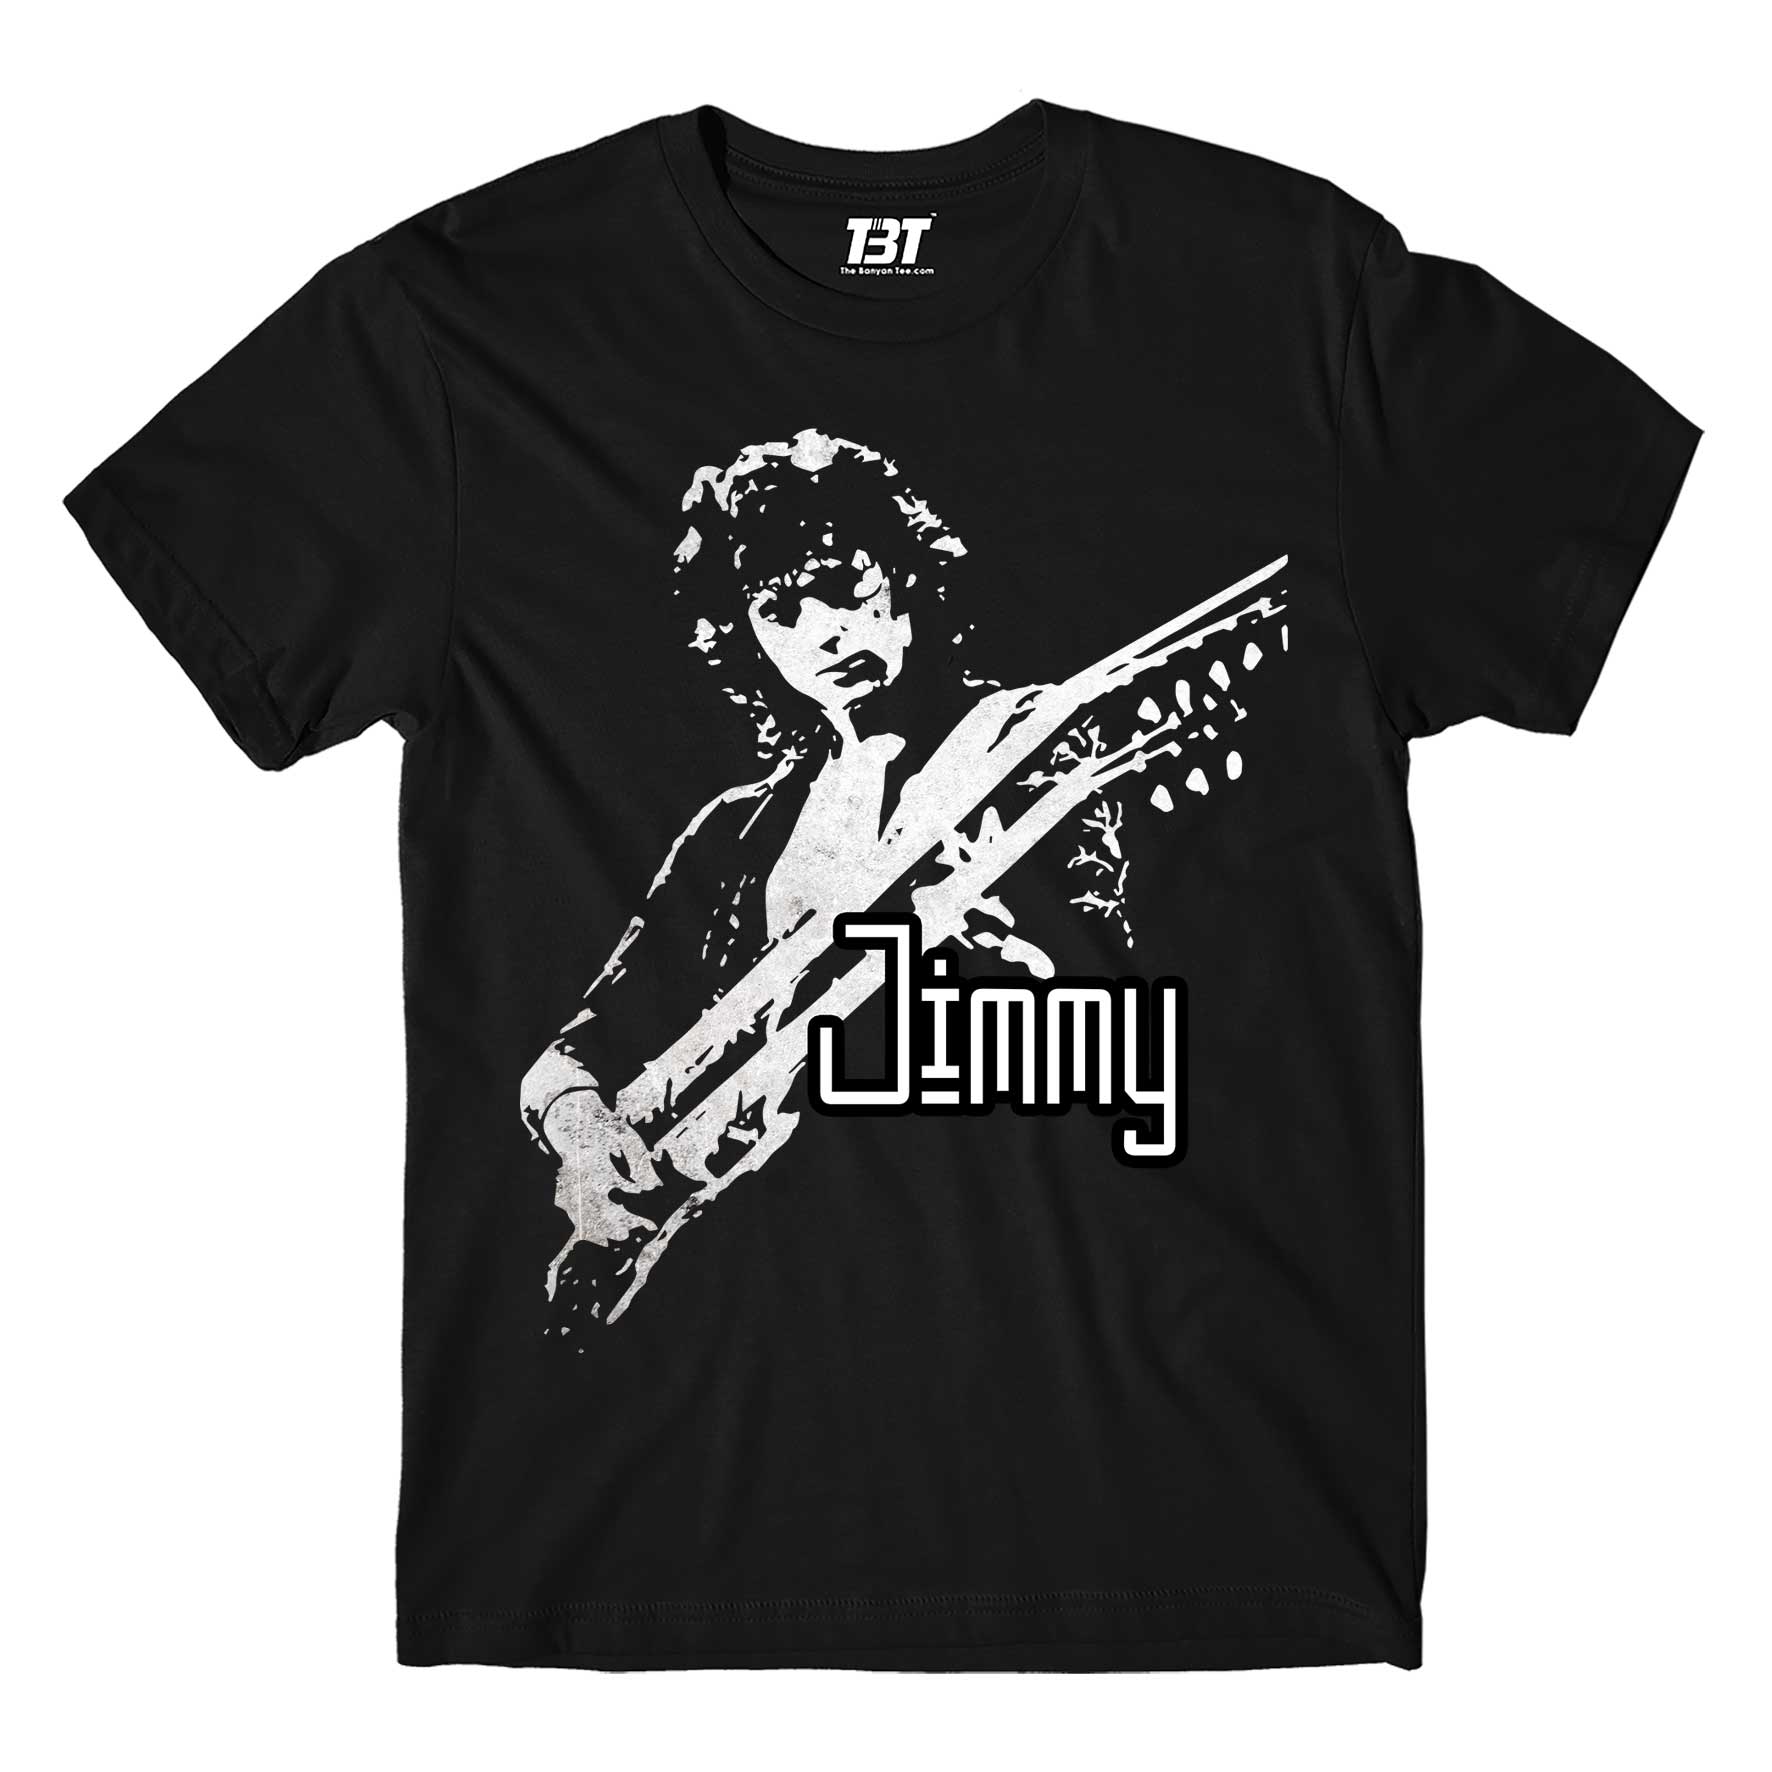 Led Zeppelin T-shirt - Jimmy Page T-shirt The Banyan Tee TBT